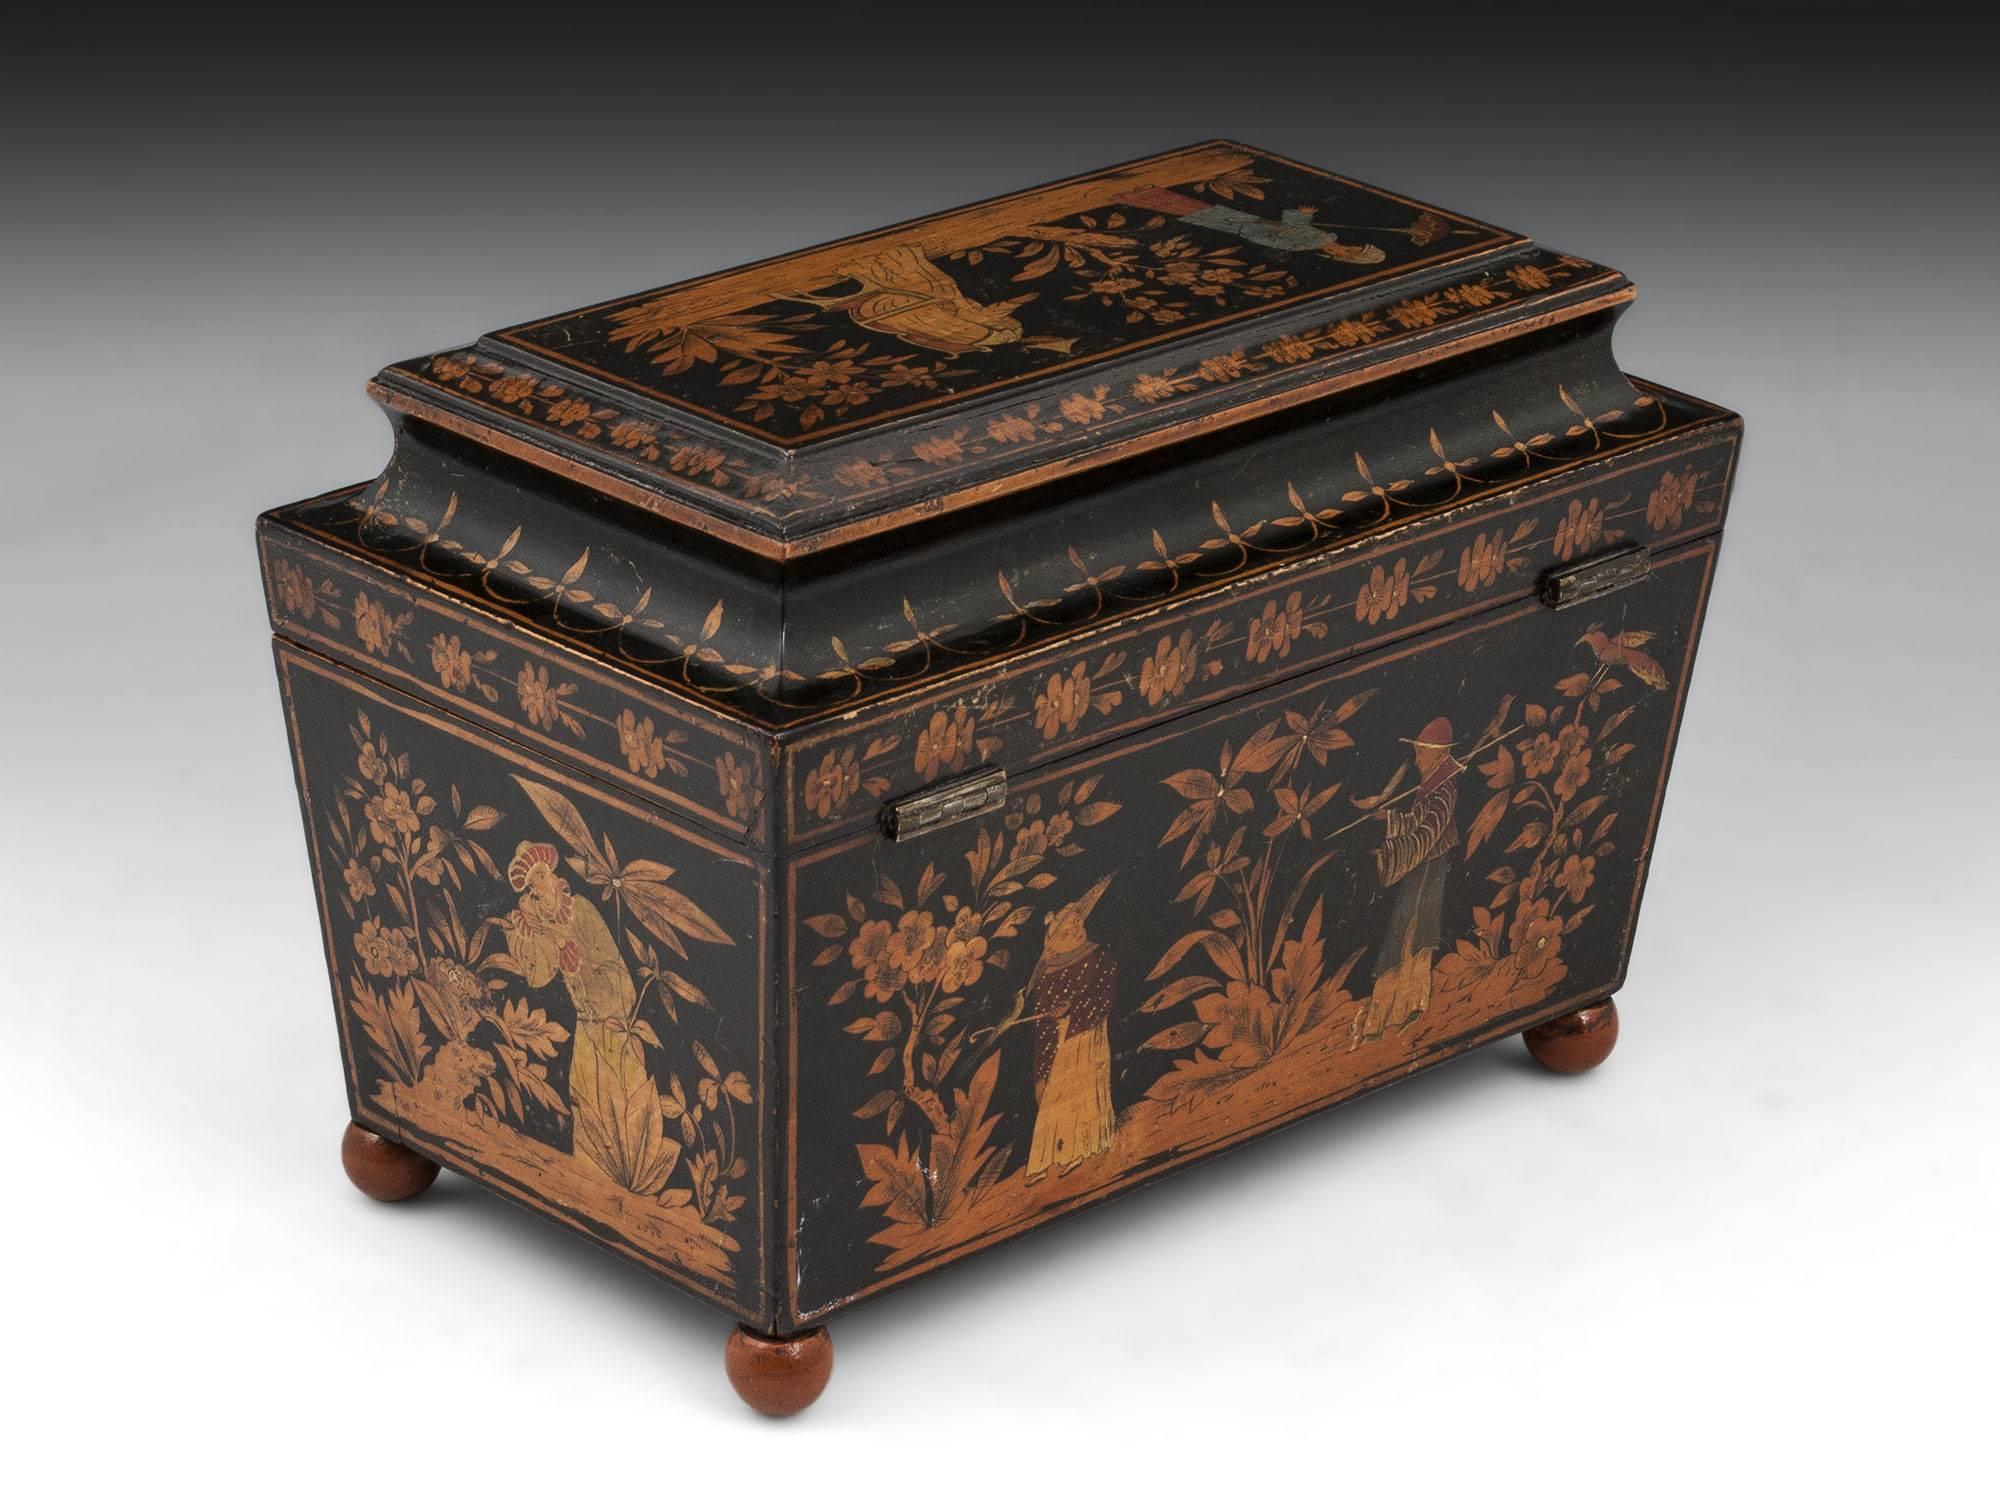 Superb Regency Painted Penwork and Chinoiserie Sarcophagus Shaped Tea Caddy In Good Condition In Bradford on Avon, GB